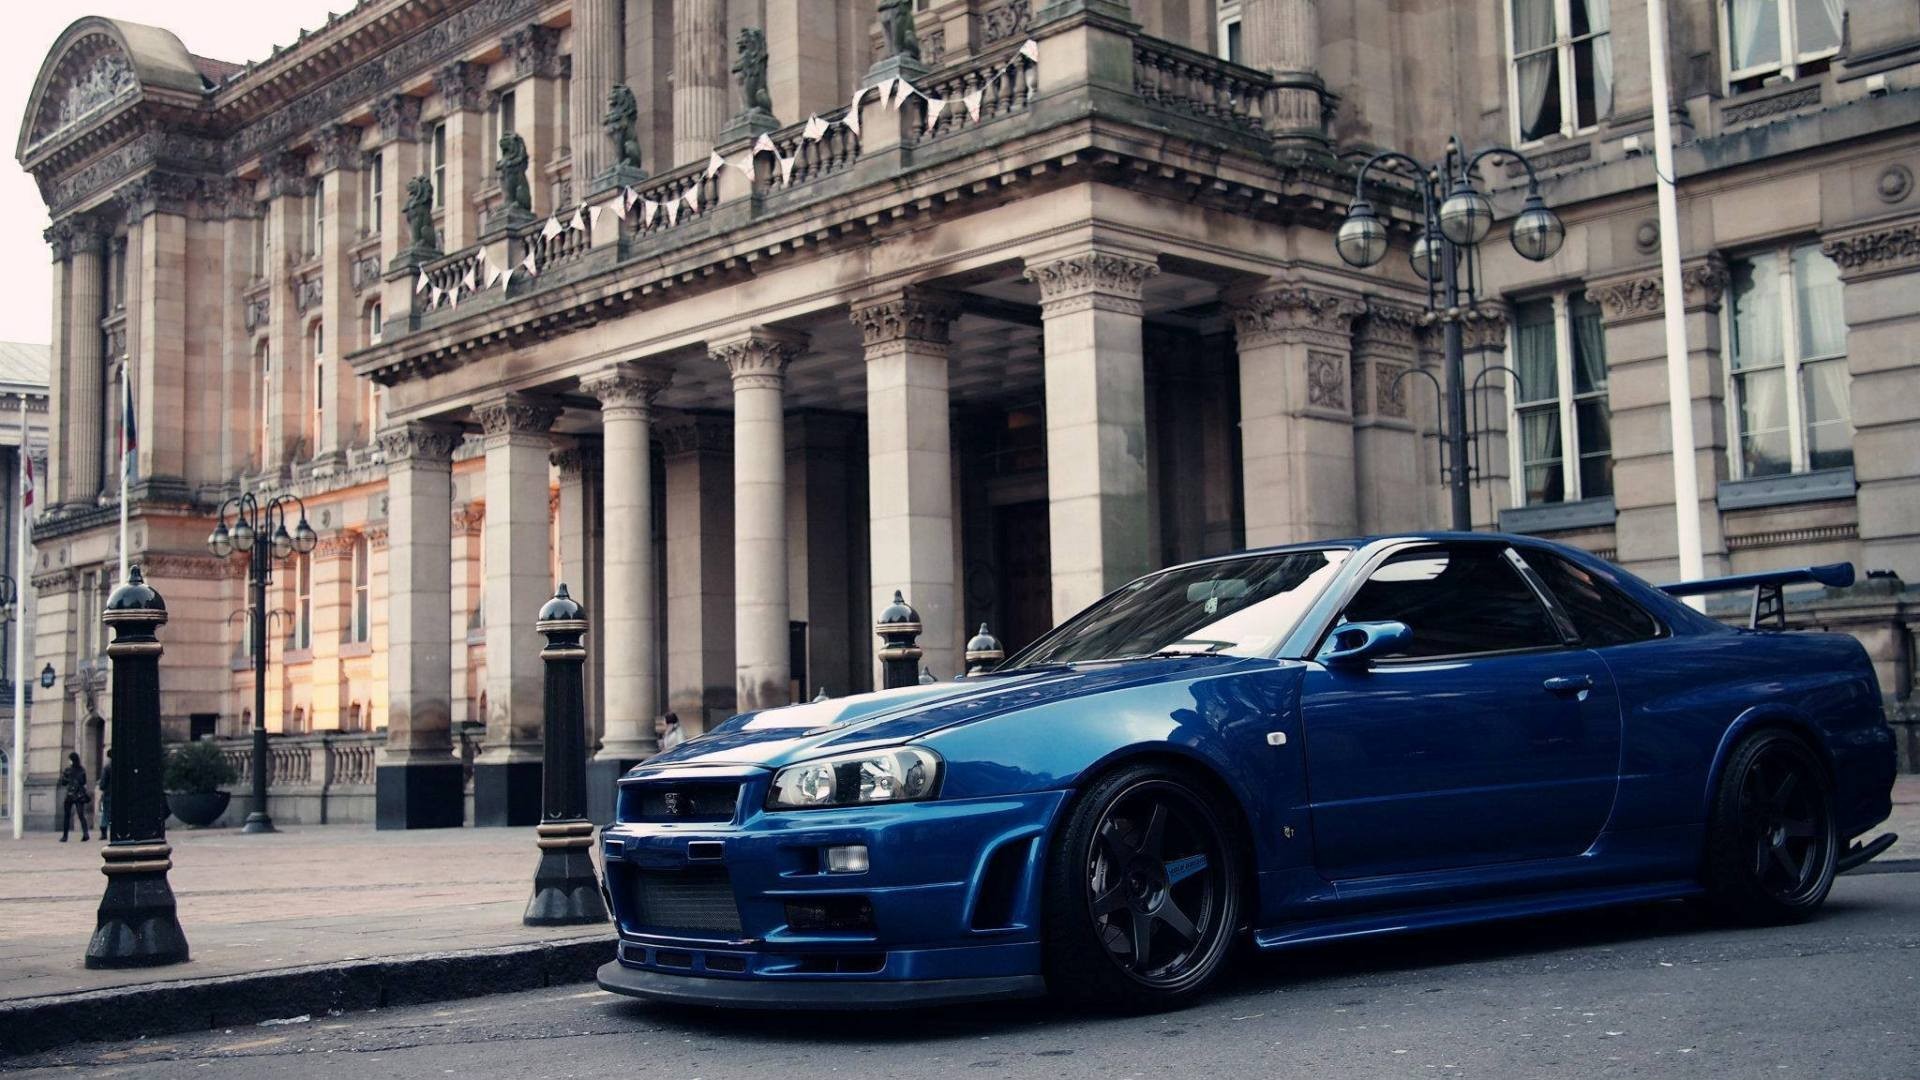 Nissan Skyline Gtr Wallpaper Full HD White Widescreen Iphone Blue Nismo :  Archived at Car Wallpaper – Slhando.com Nissan Skyline GTR Wallpapers | A…  …